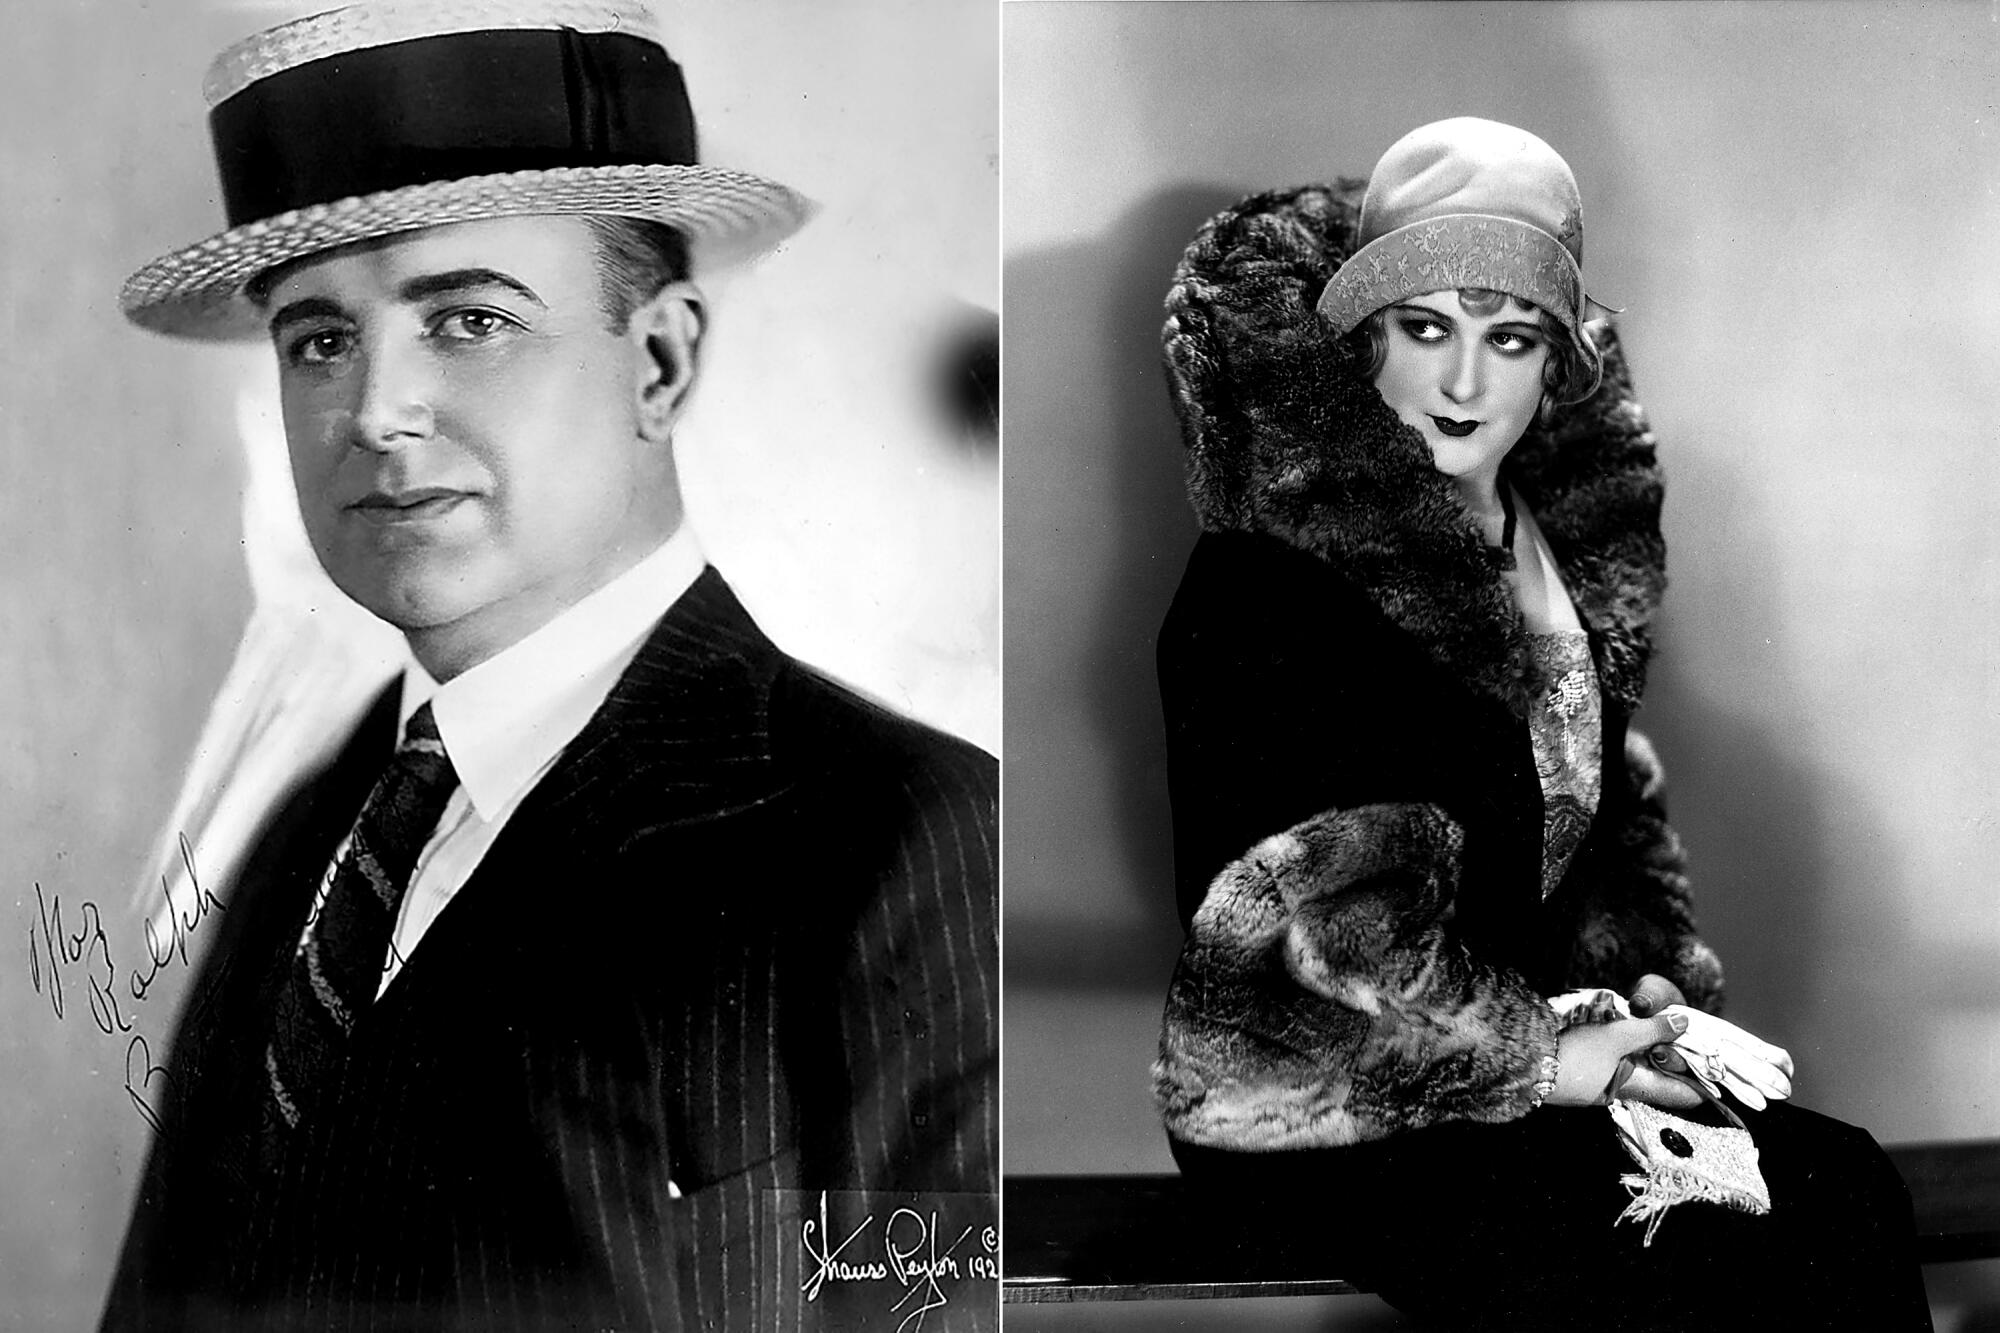 Julian Eltinge circa 1930 on the left, and as a female Impersonator in 1937 on the right.